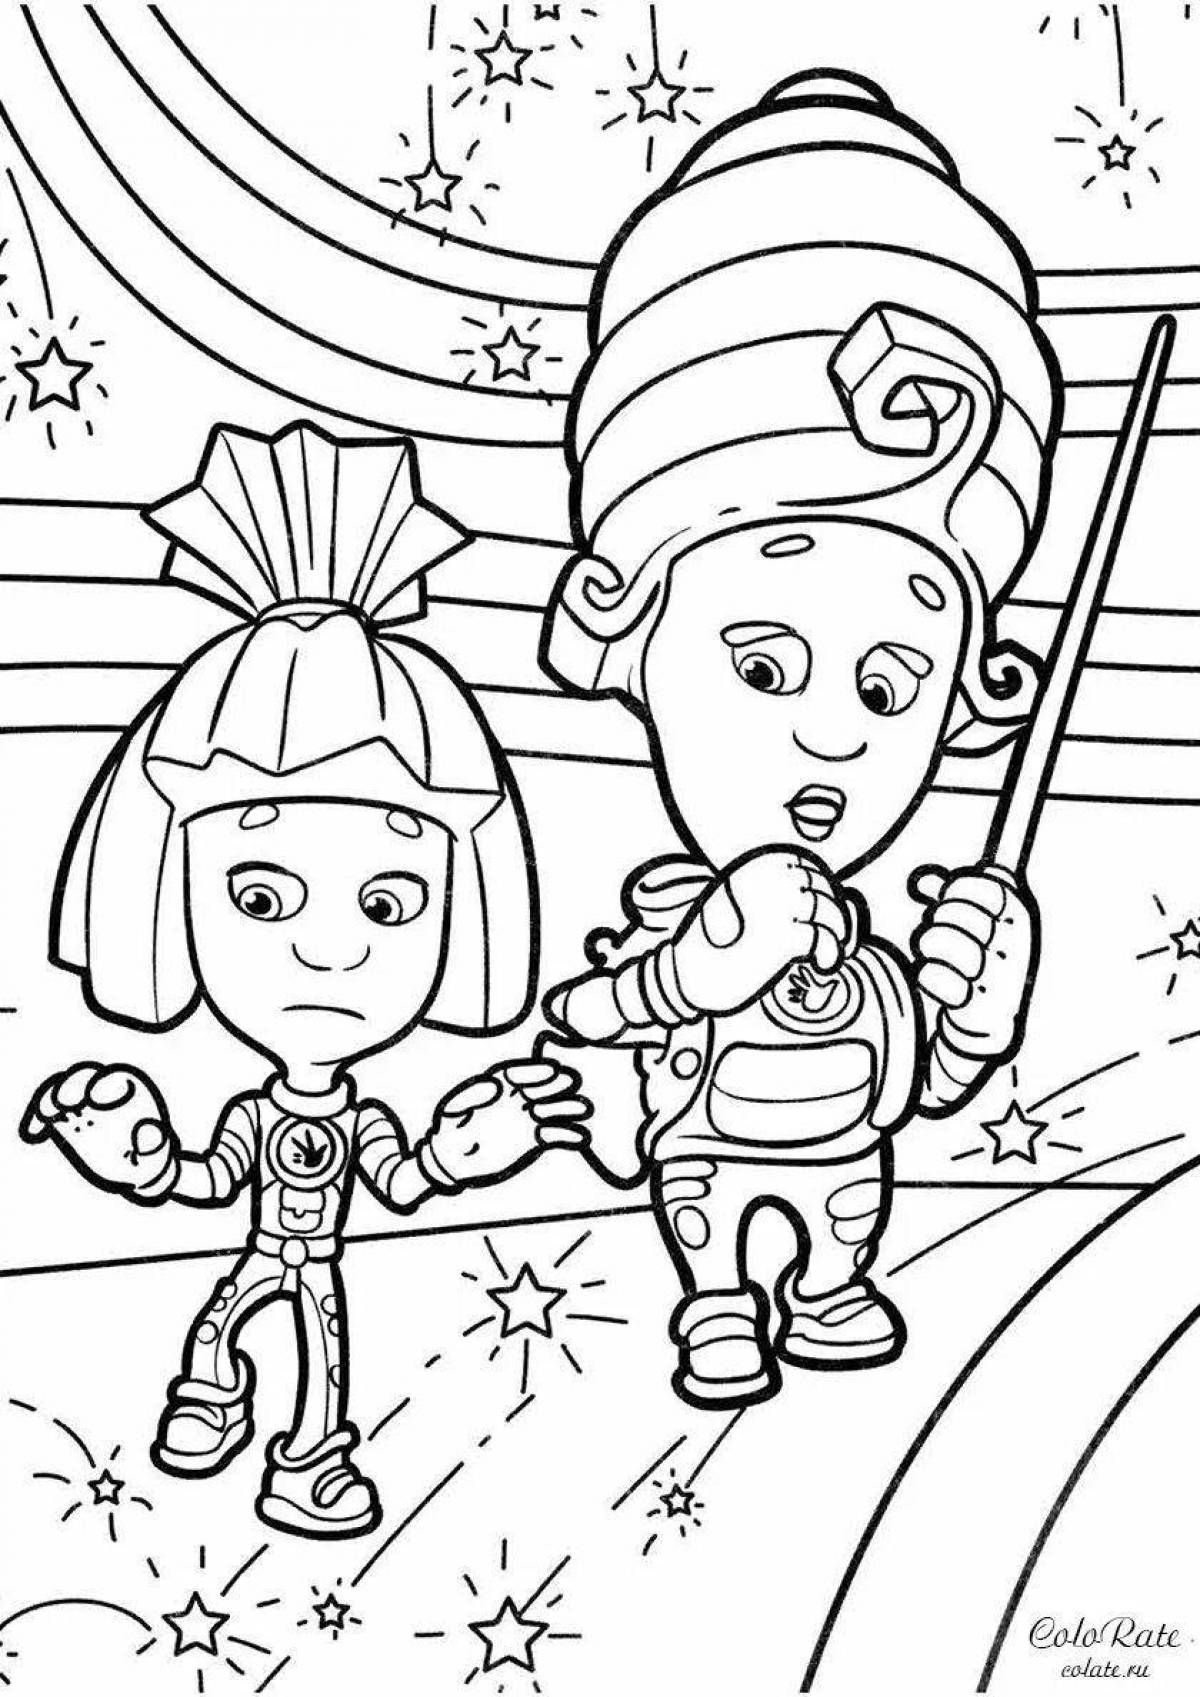 Bright cartoon coloring book for girls 6-7 years old